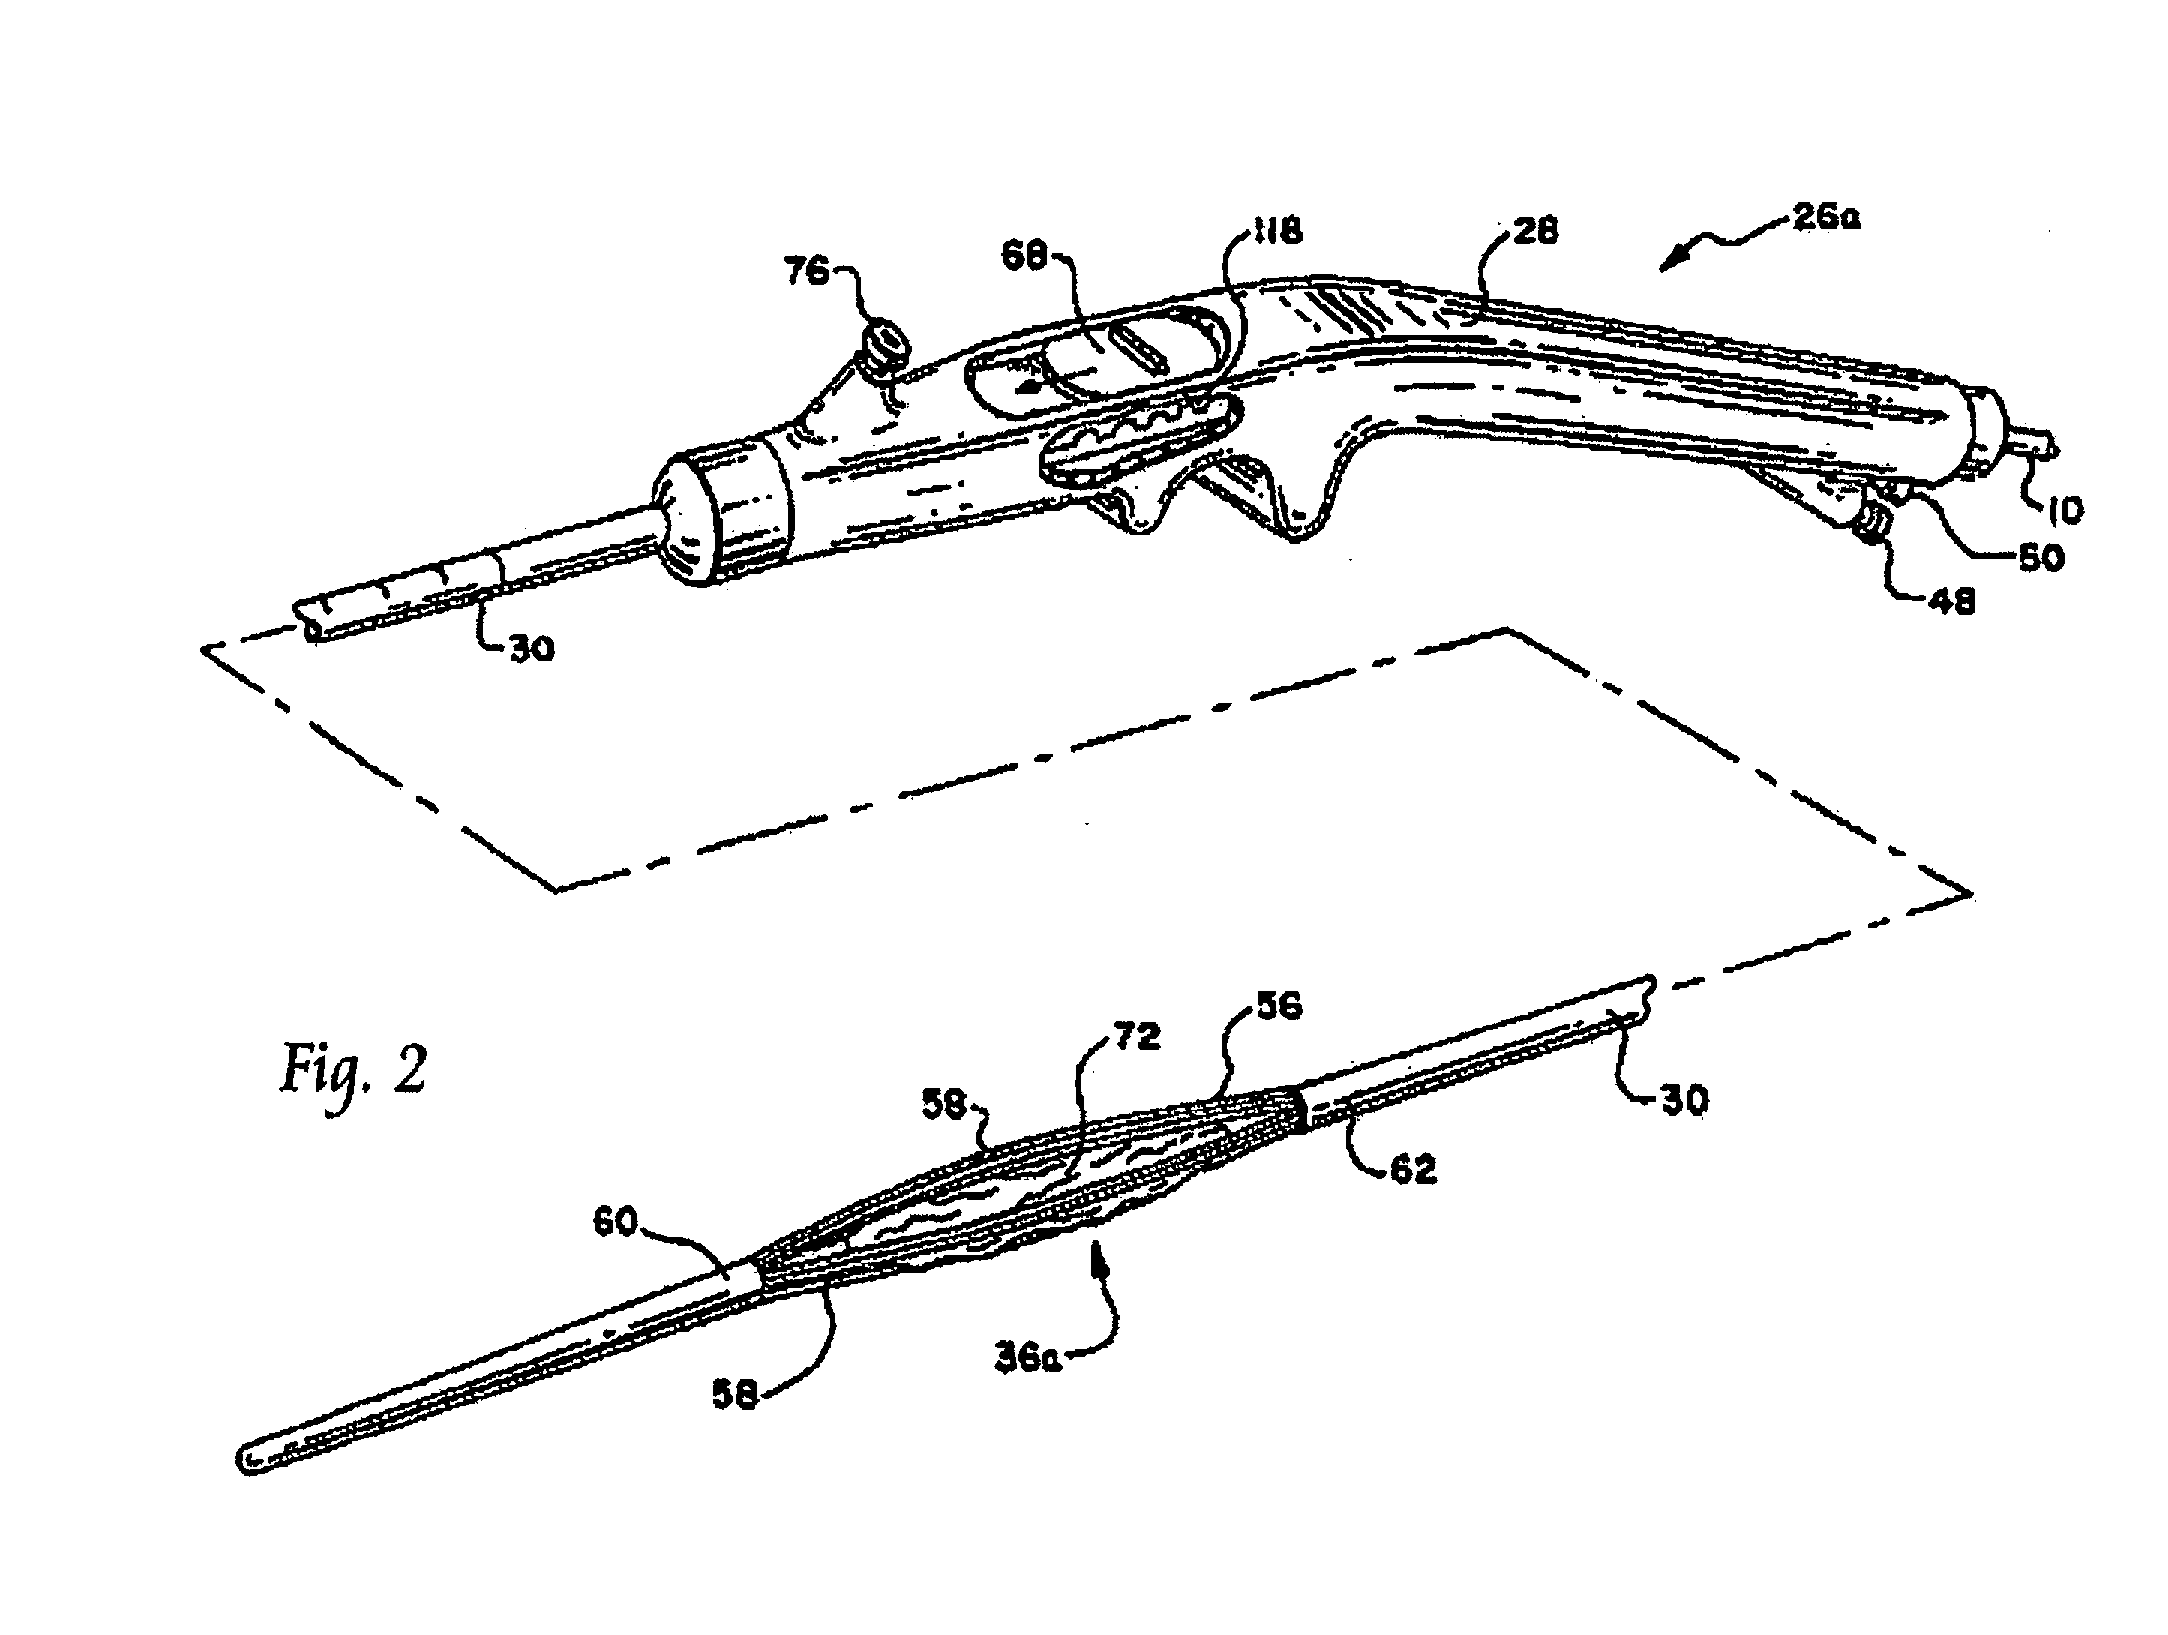 Systems and methods for treating tissue with radiofrequency energy